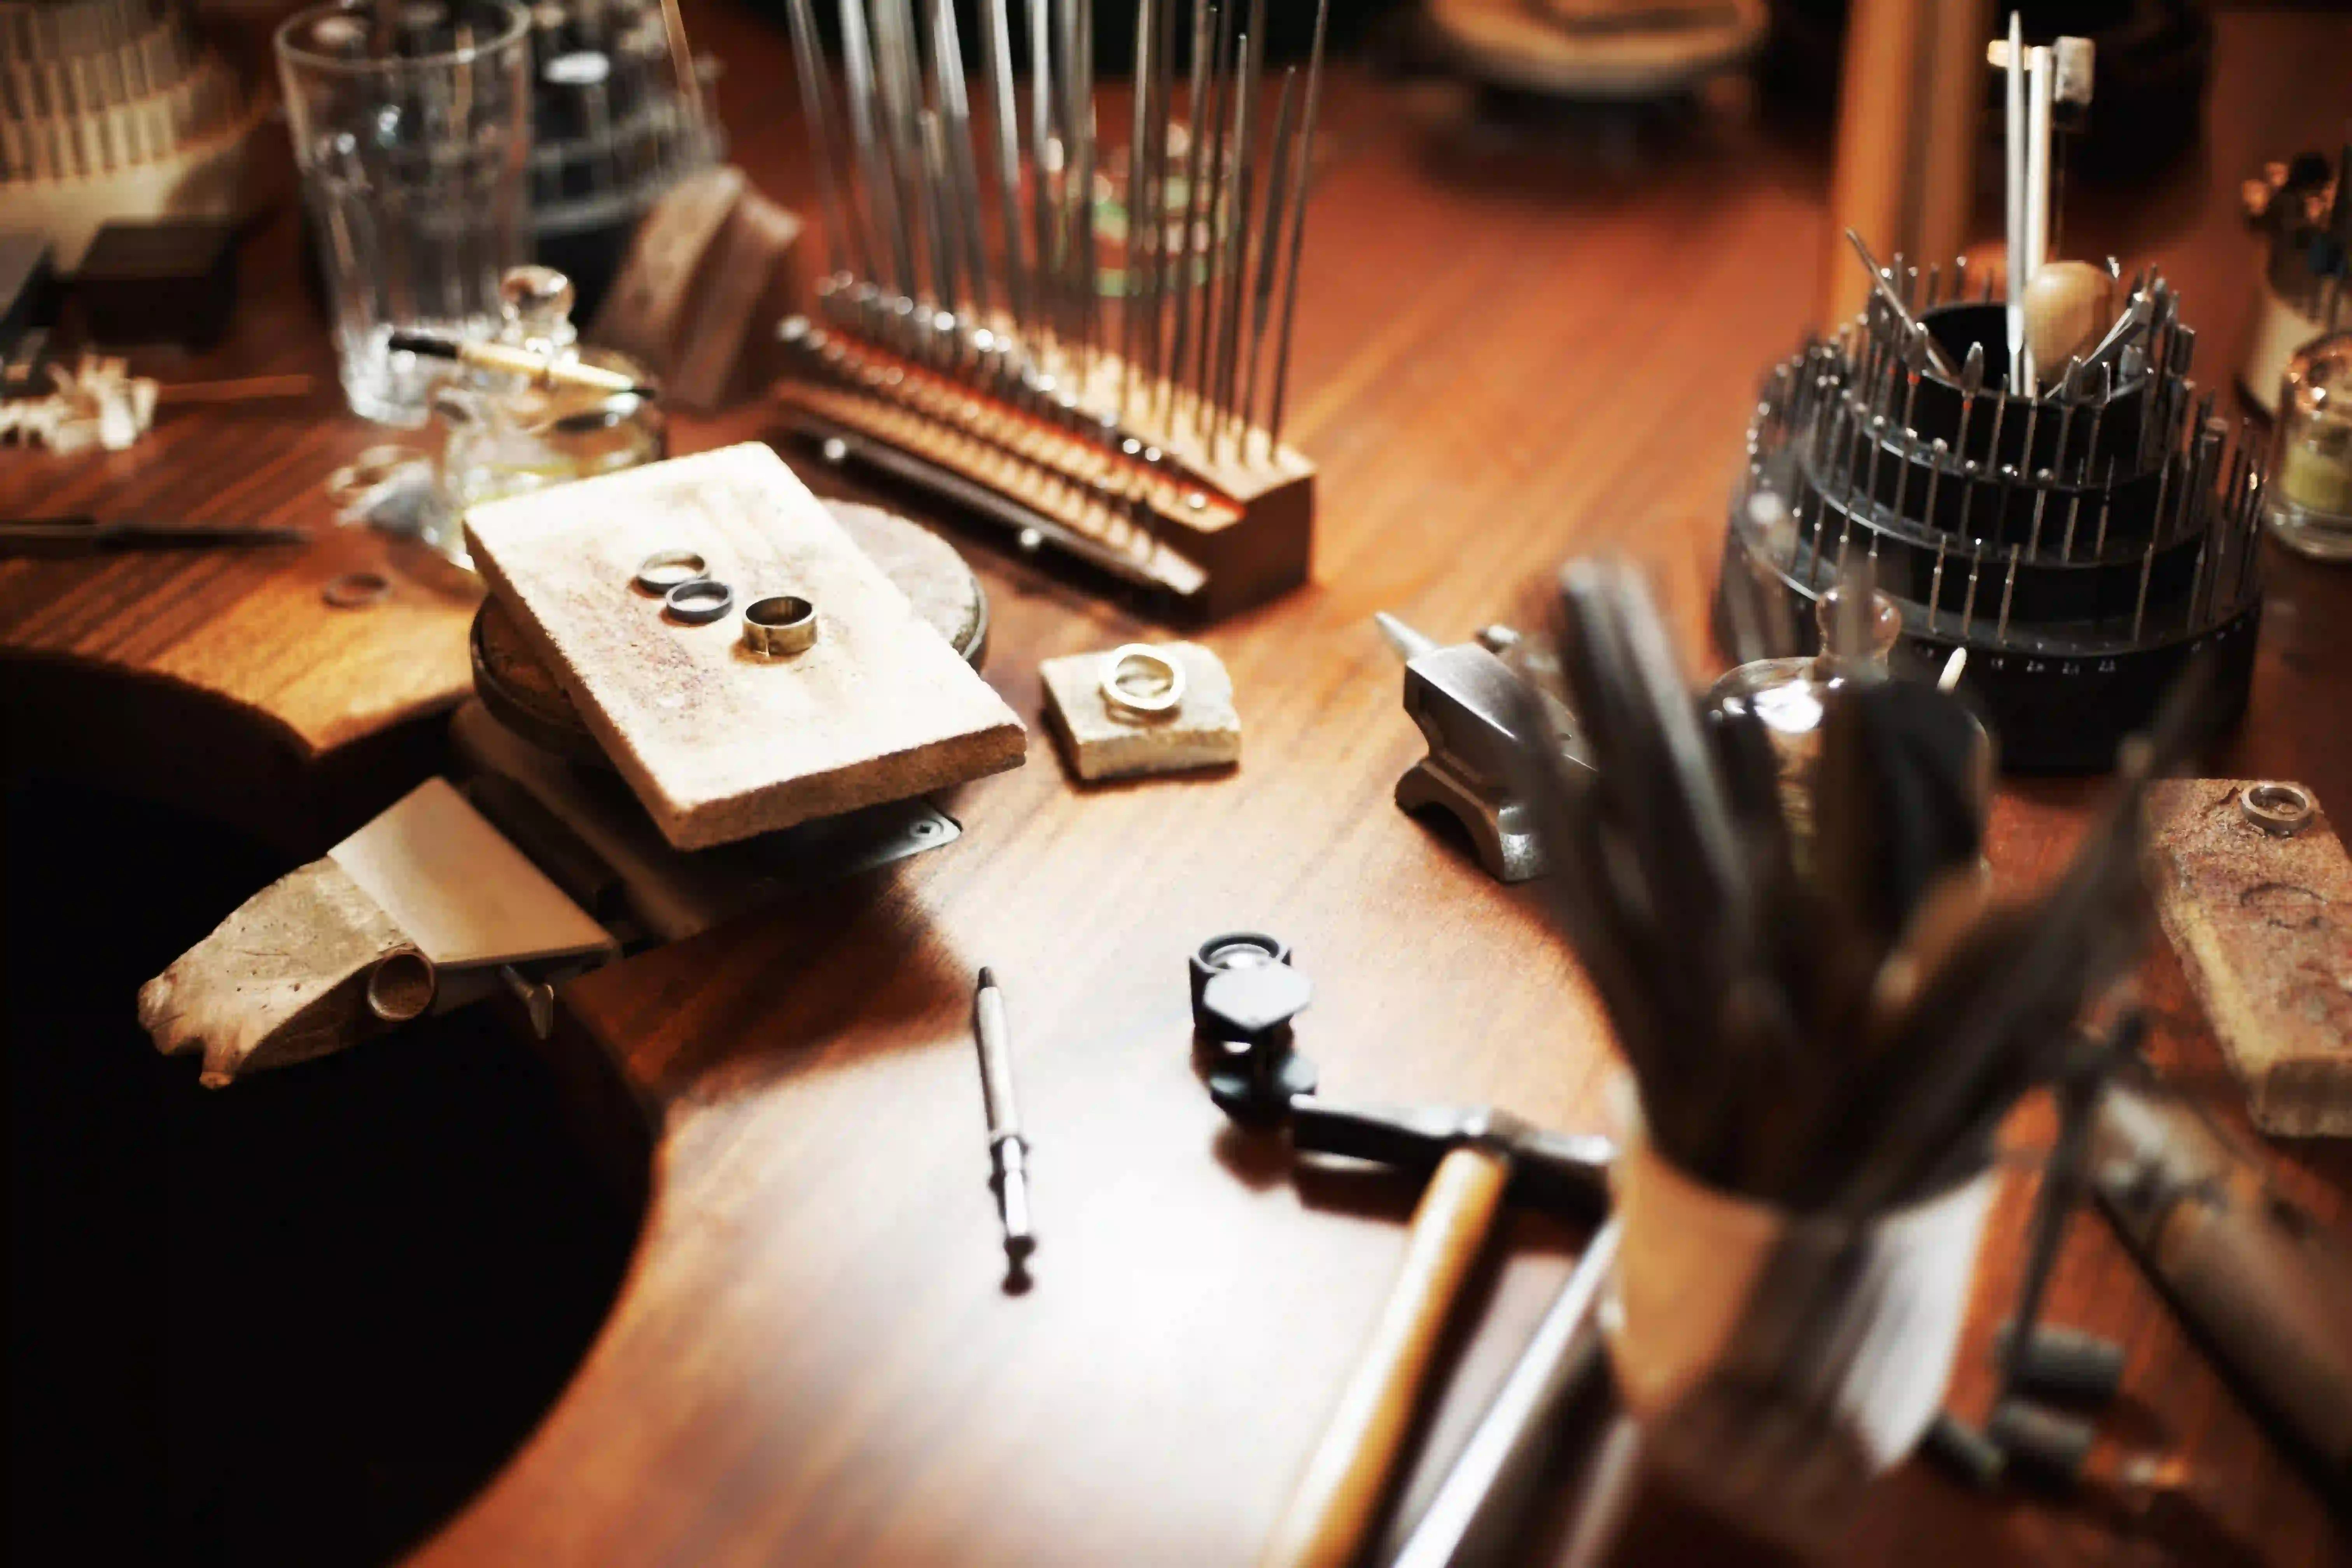 Jeweler's tools in a workshop